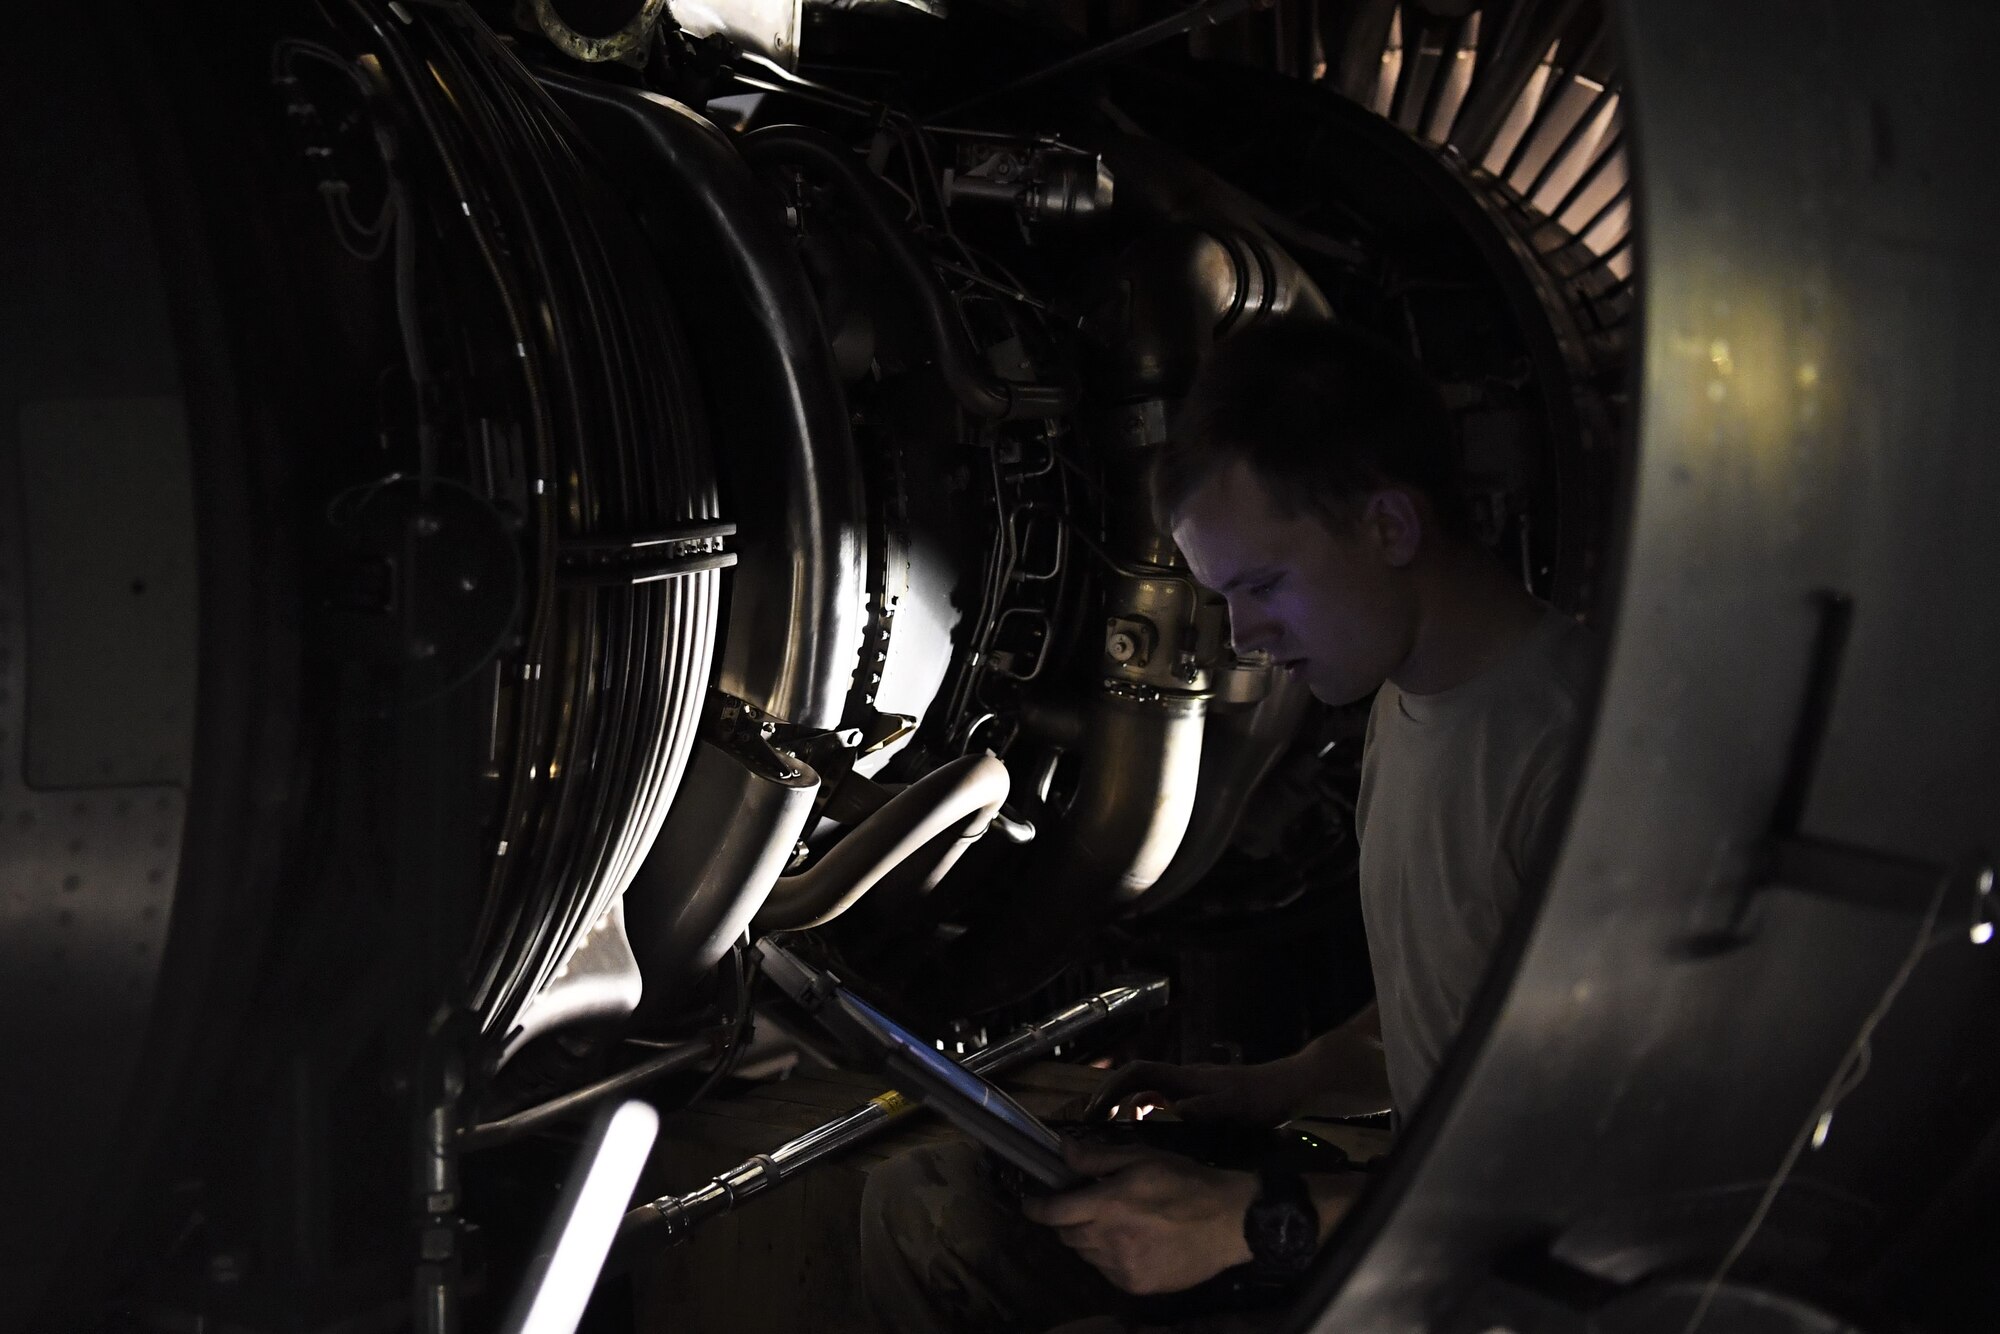 Staff Sgt. Sean Donnelly, 721st Air Mobility Operations Group airlift specialist mission maintenance craftsman, reviews engine schematics during an engine installation of a C-17 Globemaster III aircraft July 19, 2018, at an undisclosed location in Southwest Asia. Donnelly and his fellow 721st AMOG Airmen, who hail from Ramstein Air Base, Germany, delivered the engine and partnered with the 5th Expeditionary Mobility Squadron for the project. (U.S. Air Force photo by Staff Sgt. Christopher Stoltz)